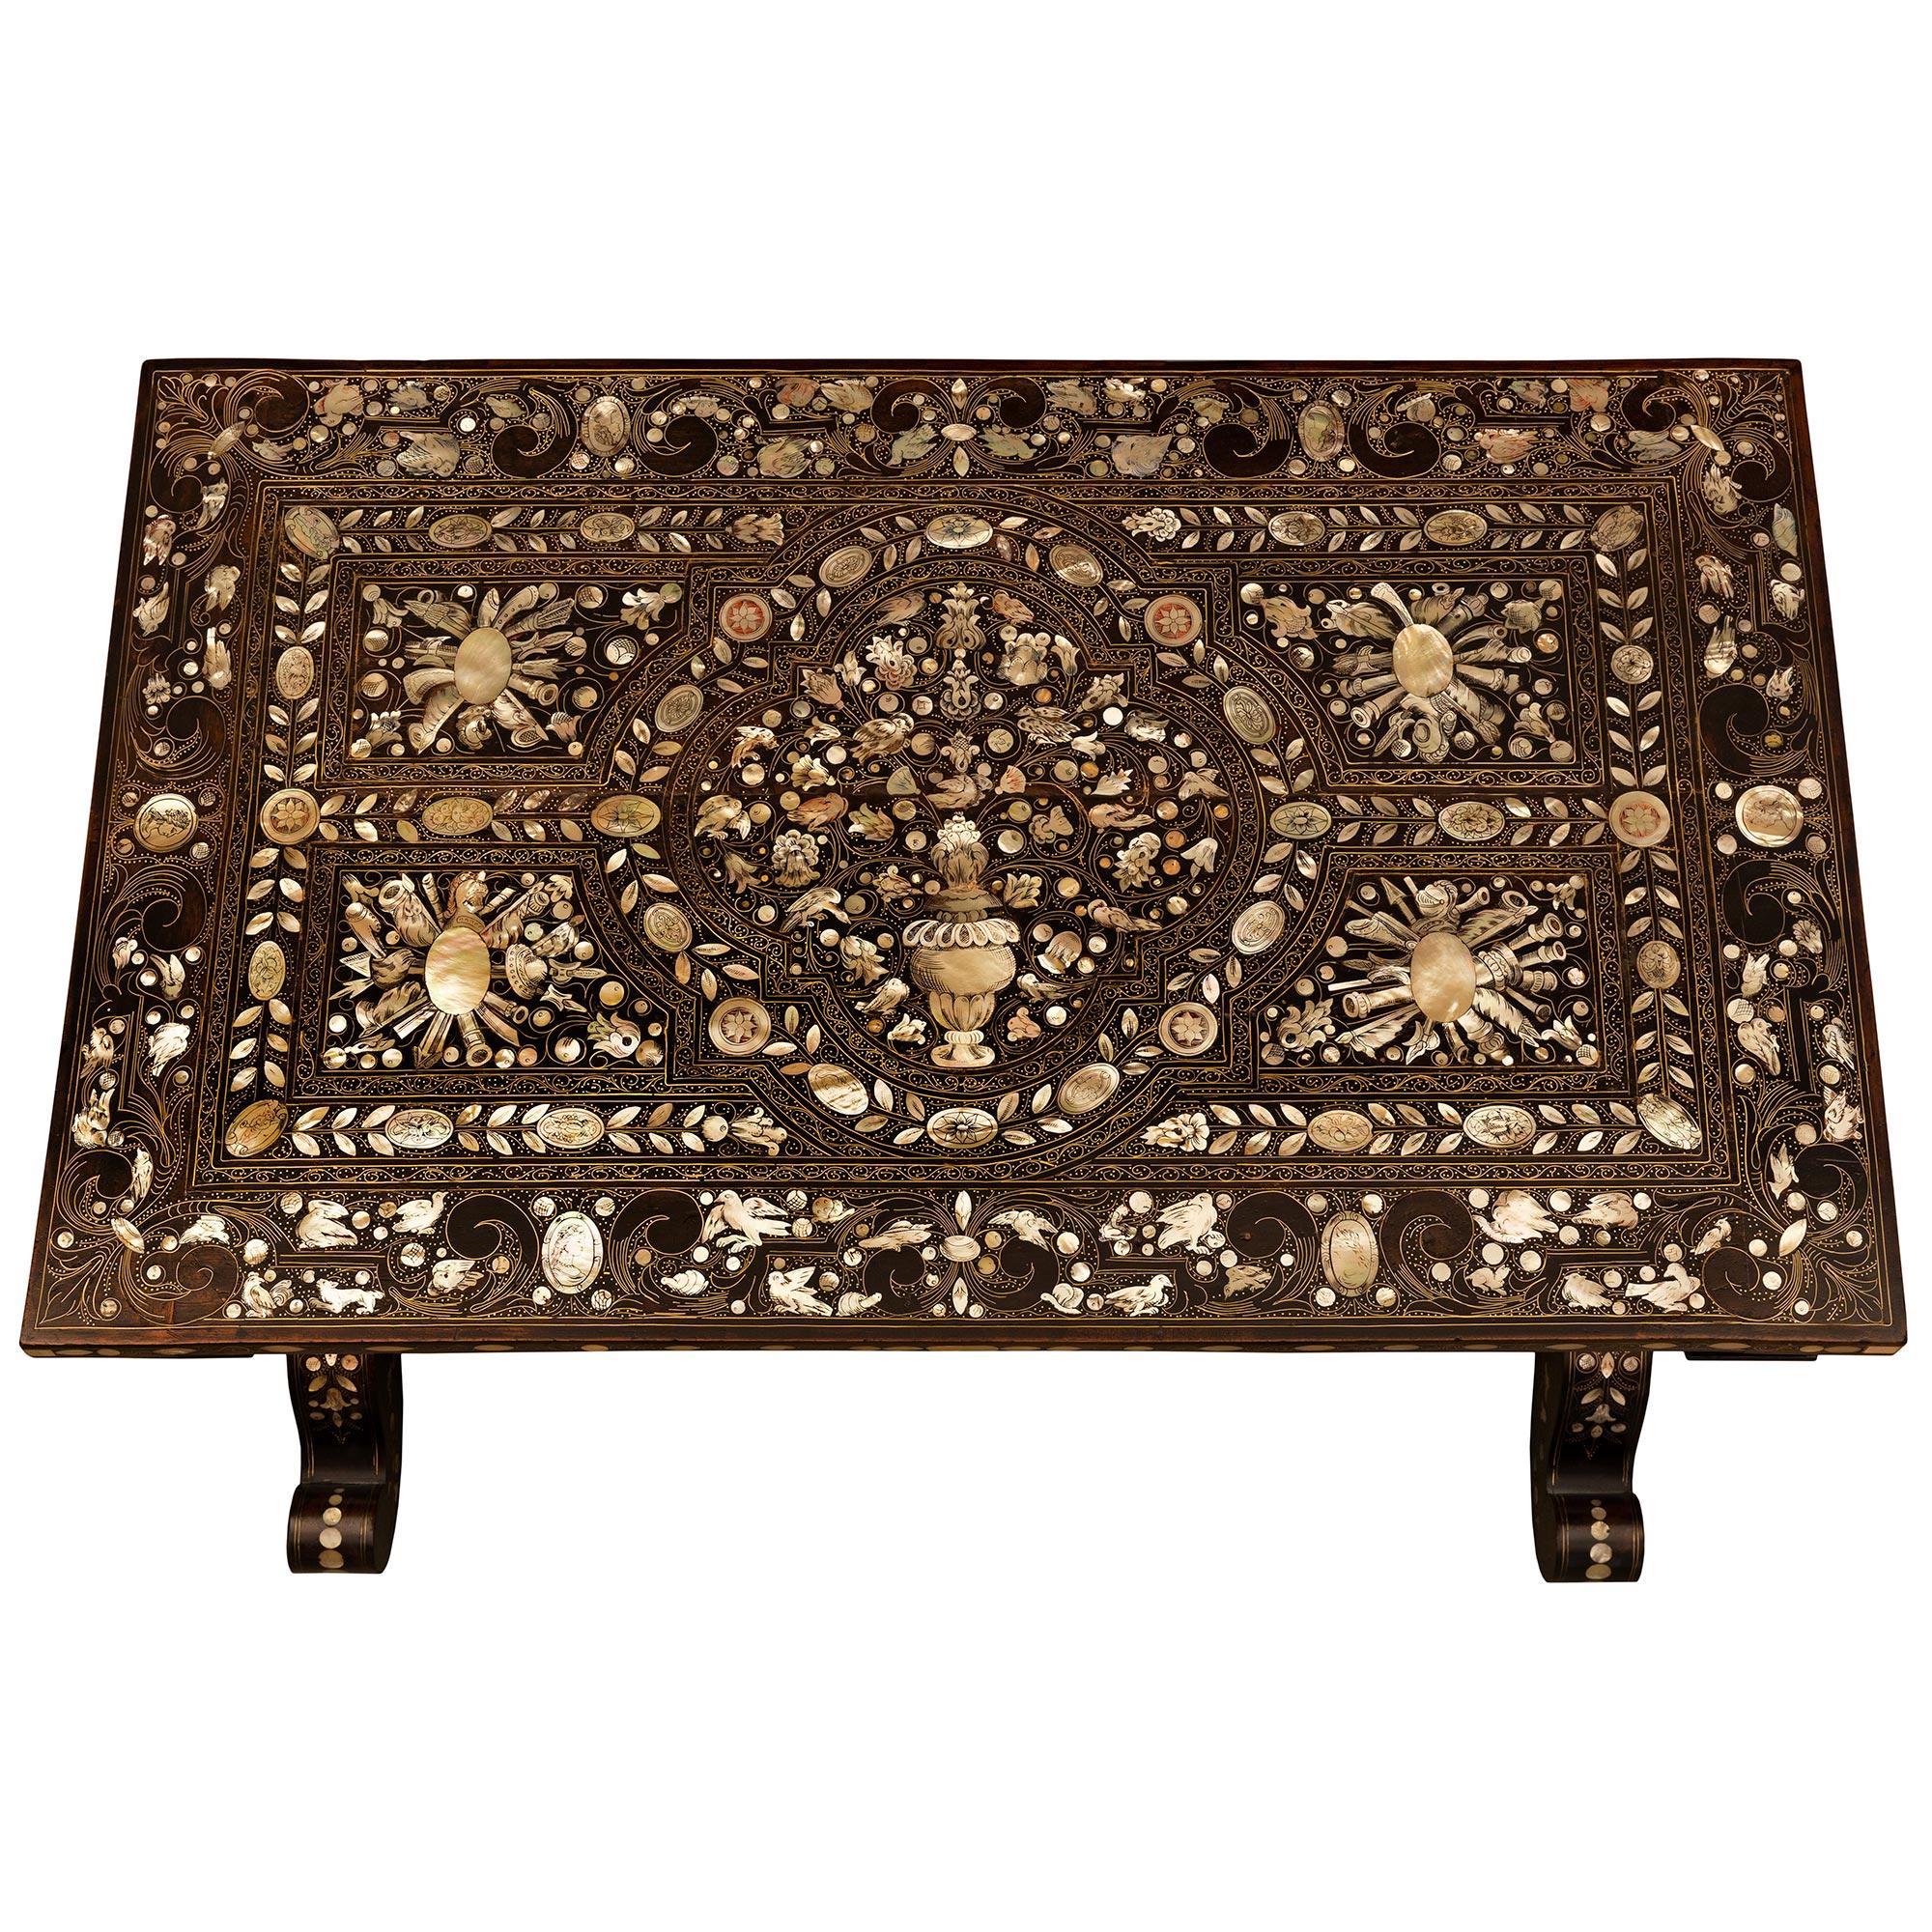 A stunning and extremely decorative Italian 19th century ebonized Fruitwood, brass, bone, and mother of pearl side table. The table is raised by fine casters below the beautifully scrolled legs with an exceptional array of inlaid mother of pearl and